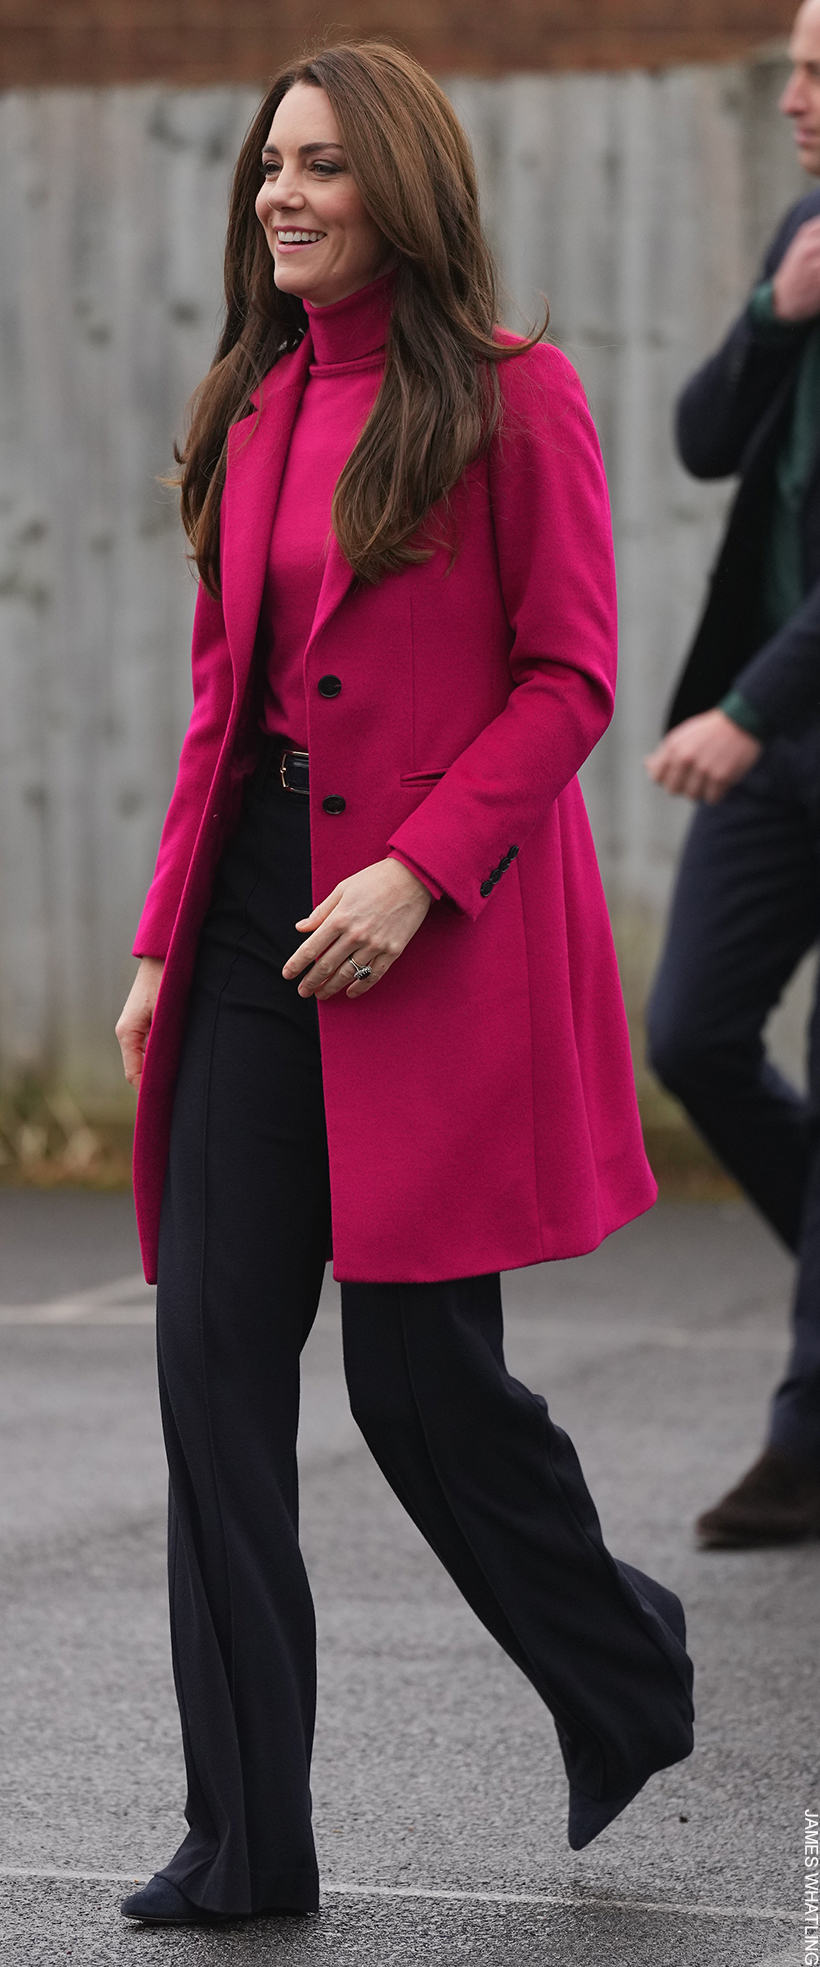 Kate Middleton's Latest Pink Outfits • pink coats, dresses, suits etc